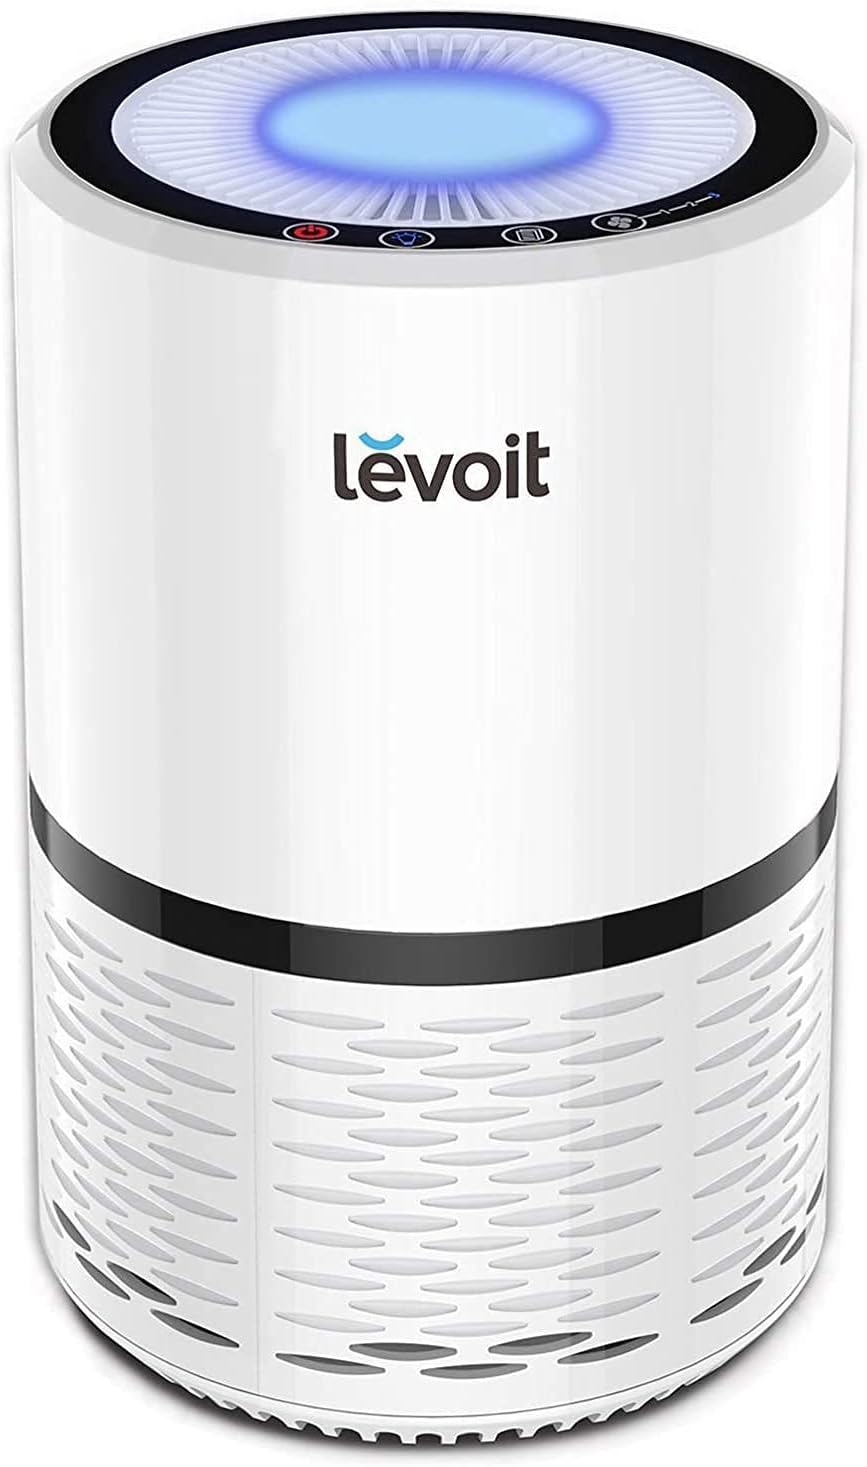 LEVOIT Air Purifiers for Home, HEPA Filter for Smoke, [...]